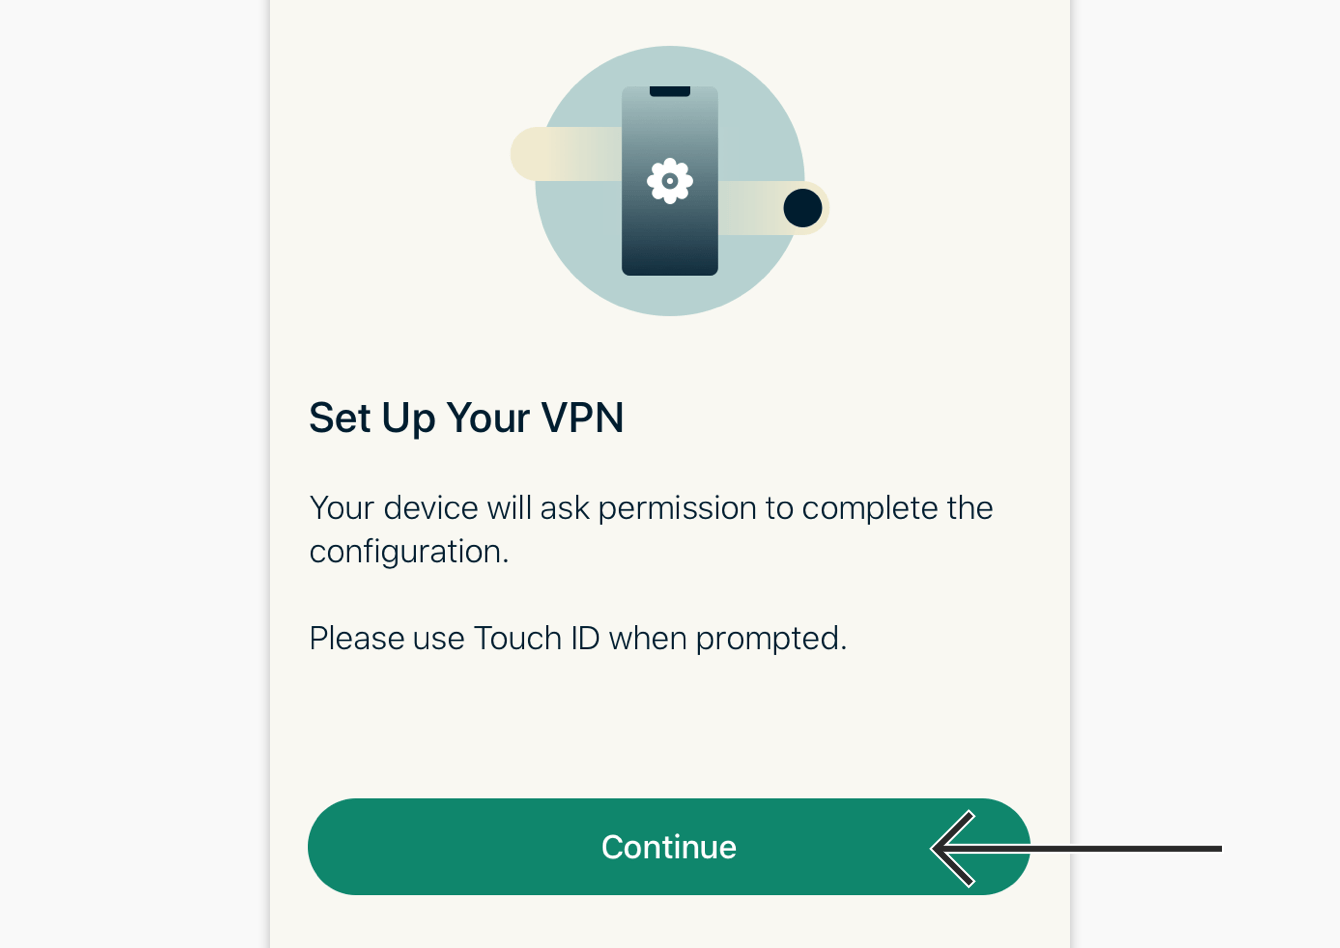 To set up your VPN, tap "Continue."